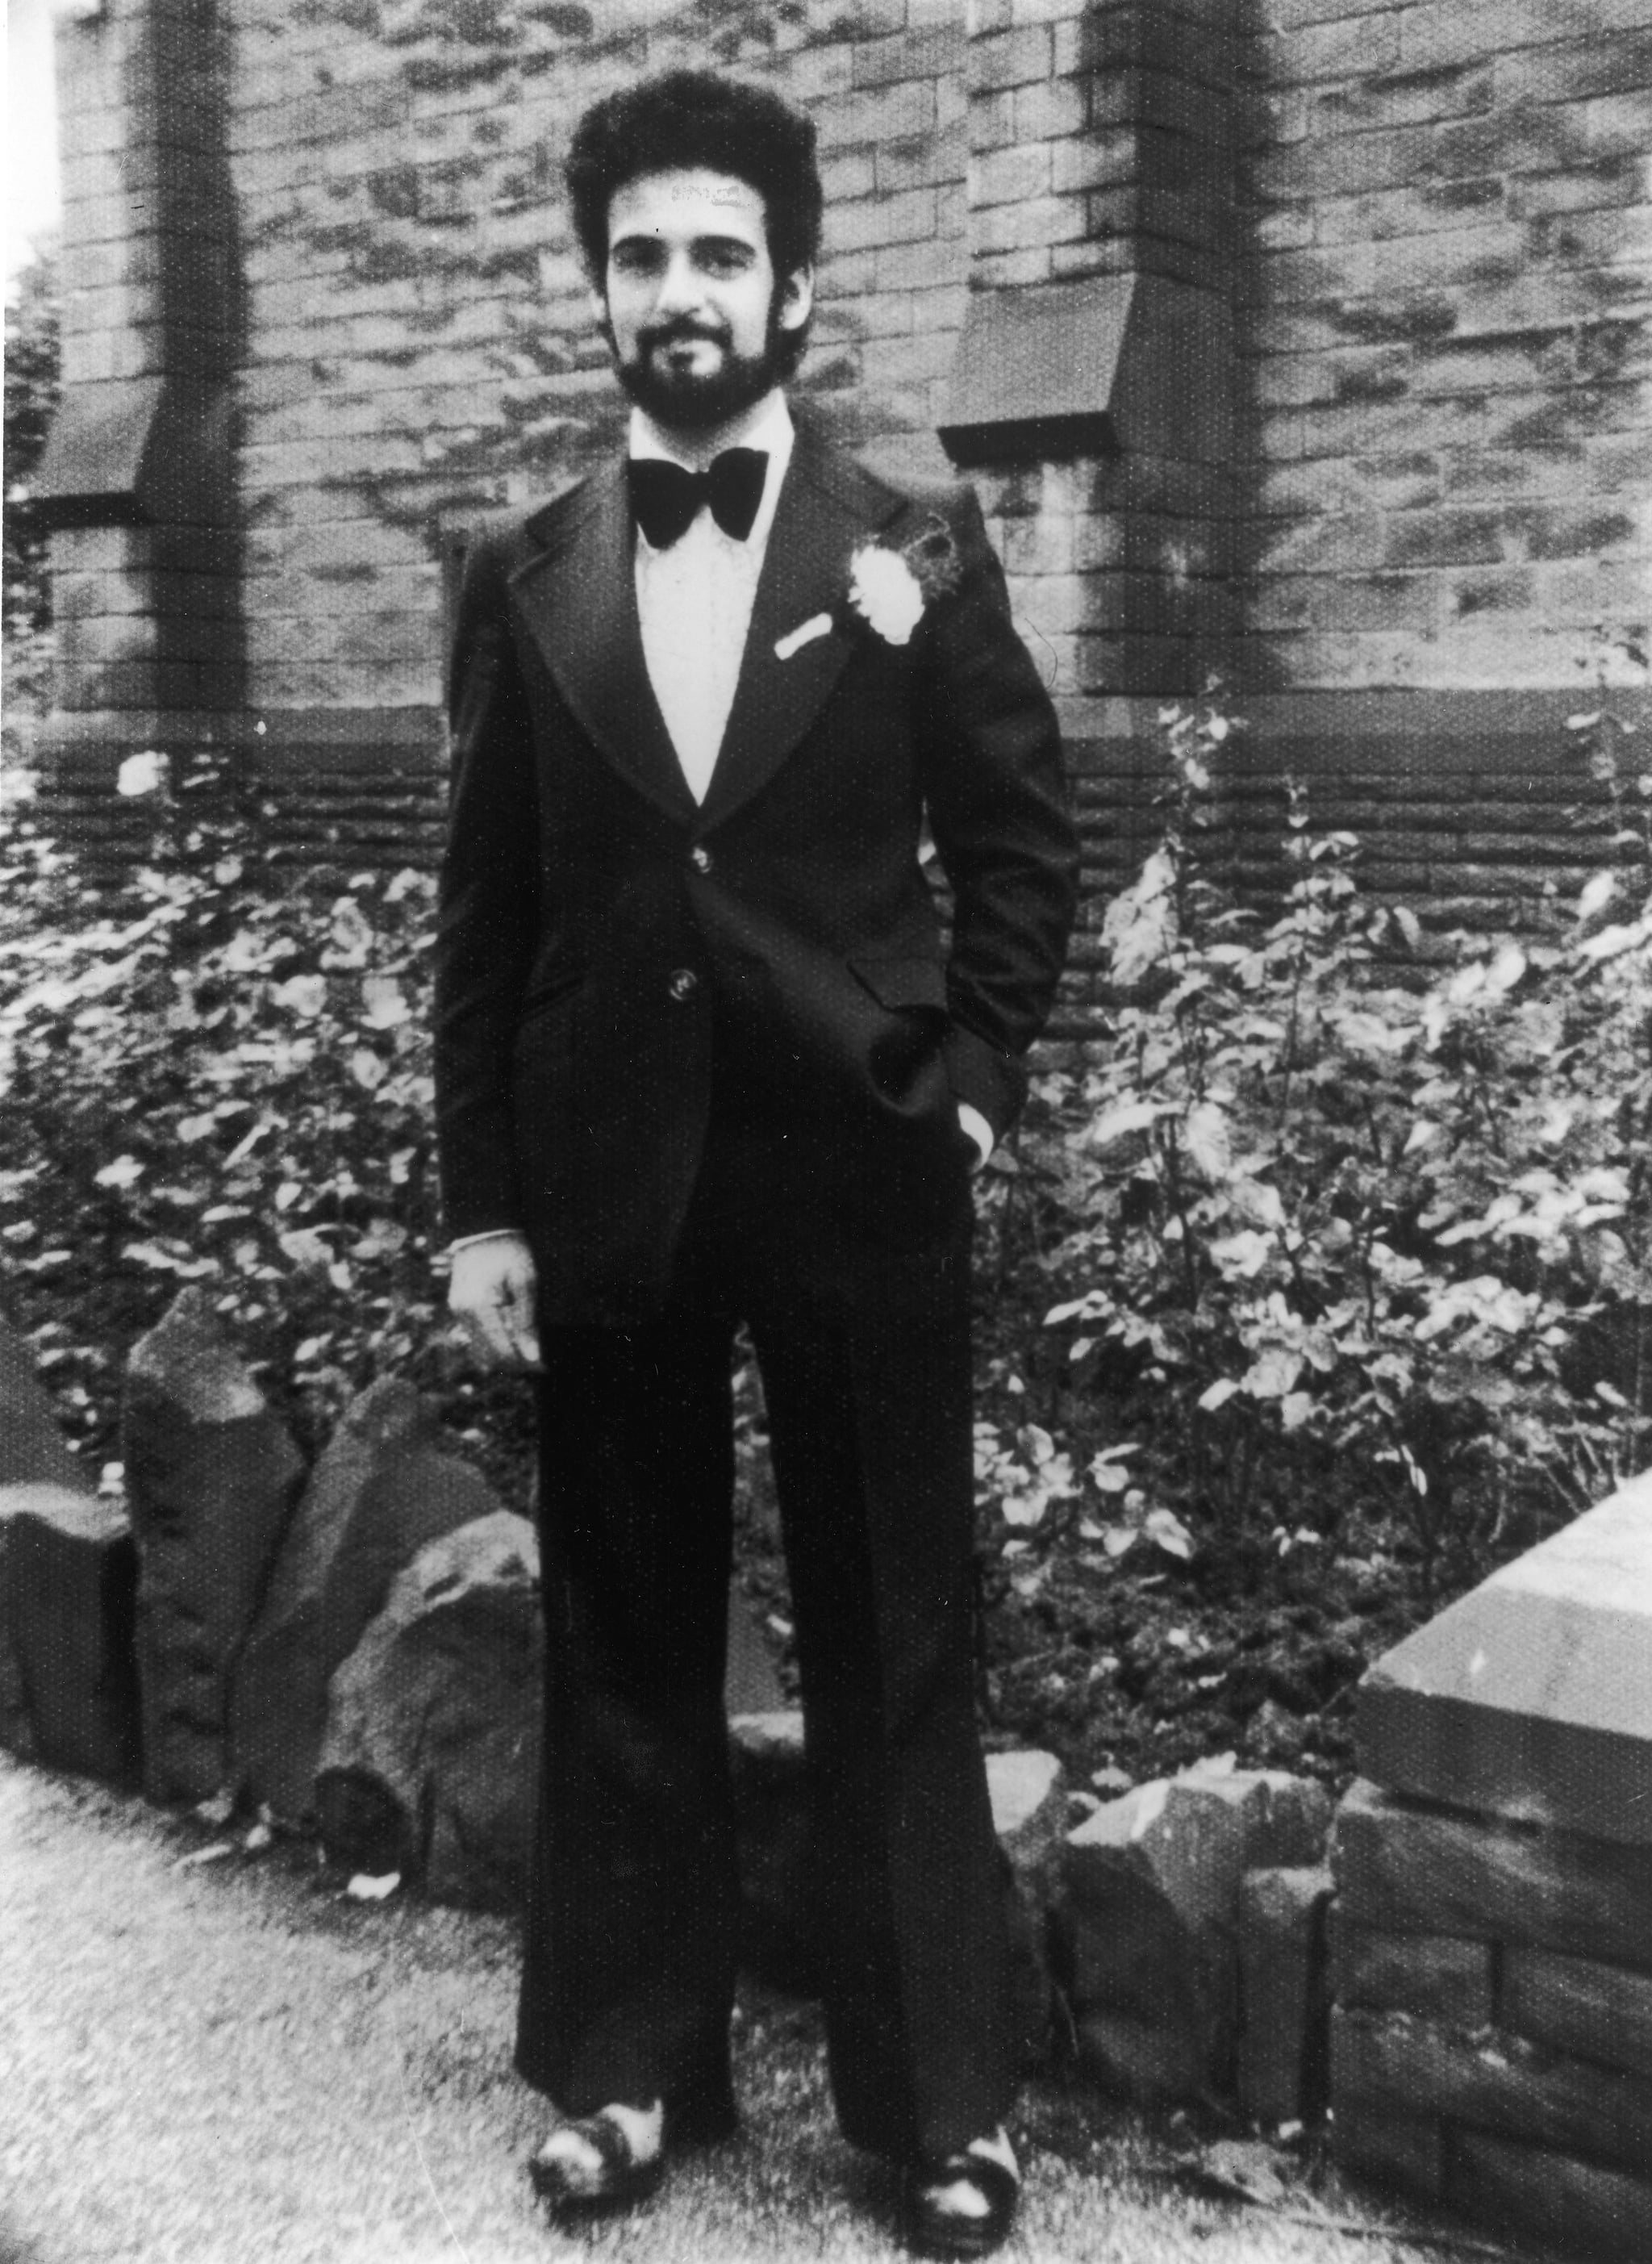 Portrait of British serial killer Peter Sutcliffe, a.k.a. 'The Yorkshire Ripper,' on his wedding day, August 10, 1974. (Photo by Express Newspapers)